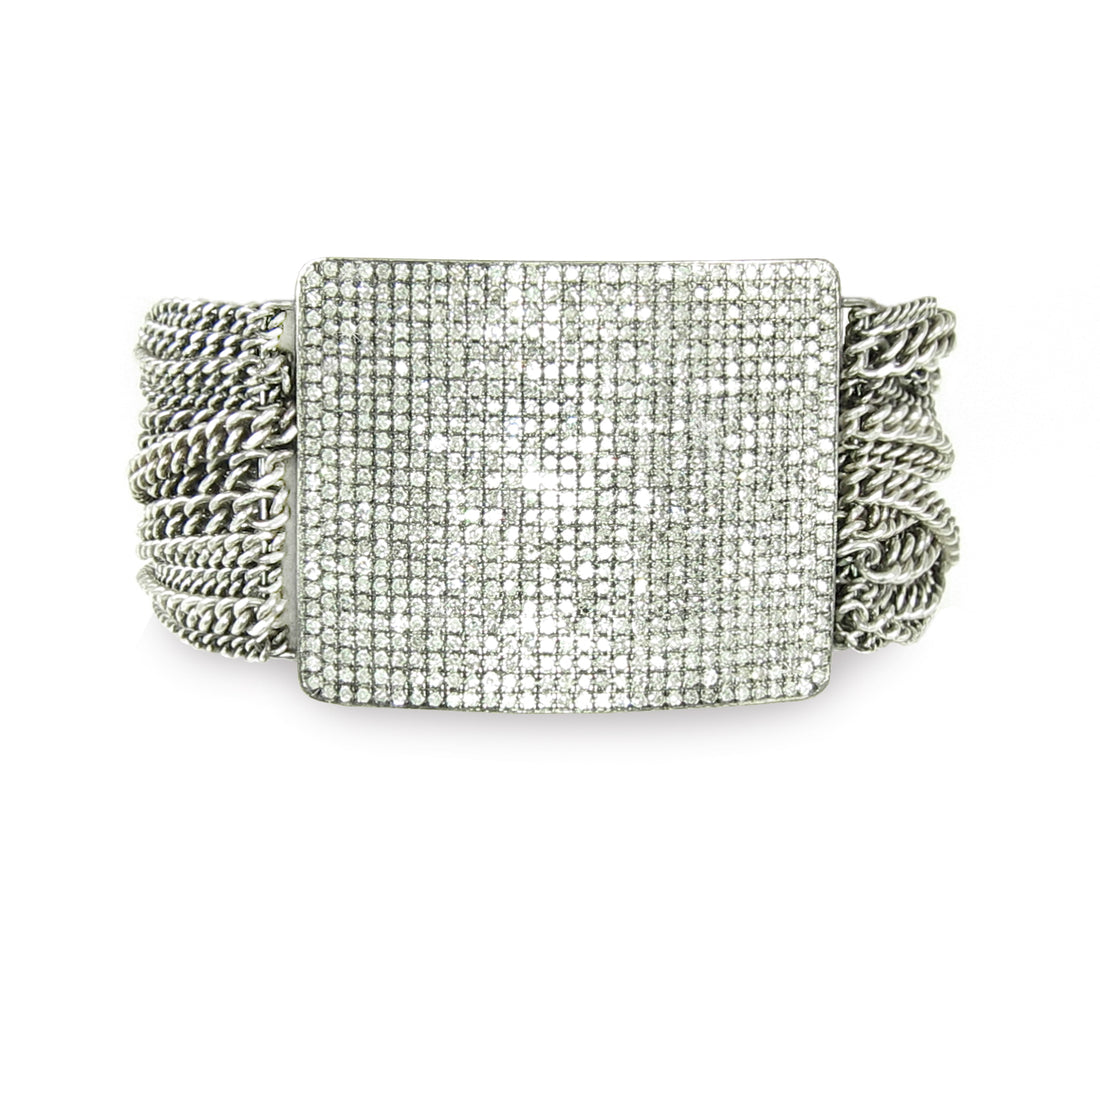 A big and bold fiery pavé diamond bar with lots of wrapped chain and magnetic clasp.